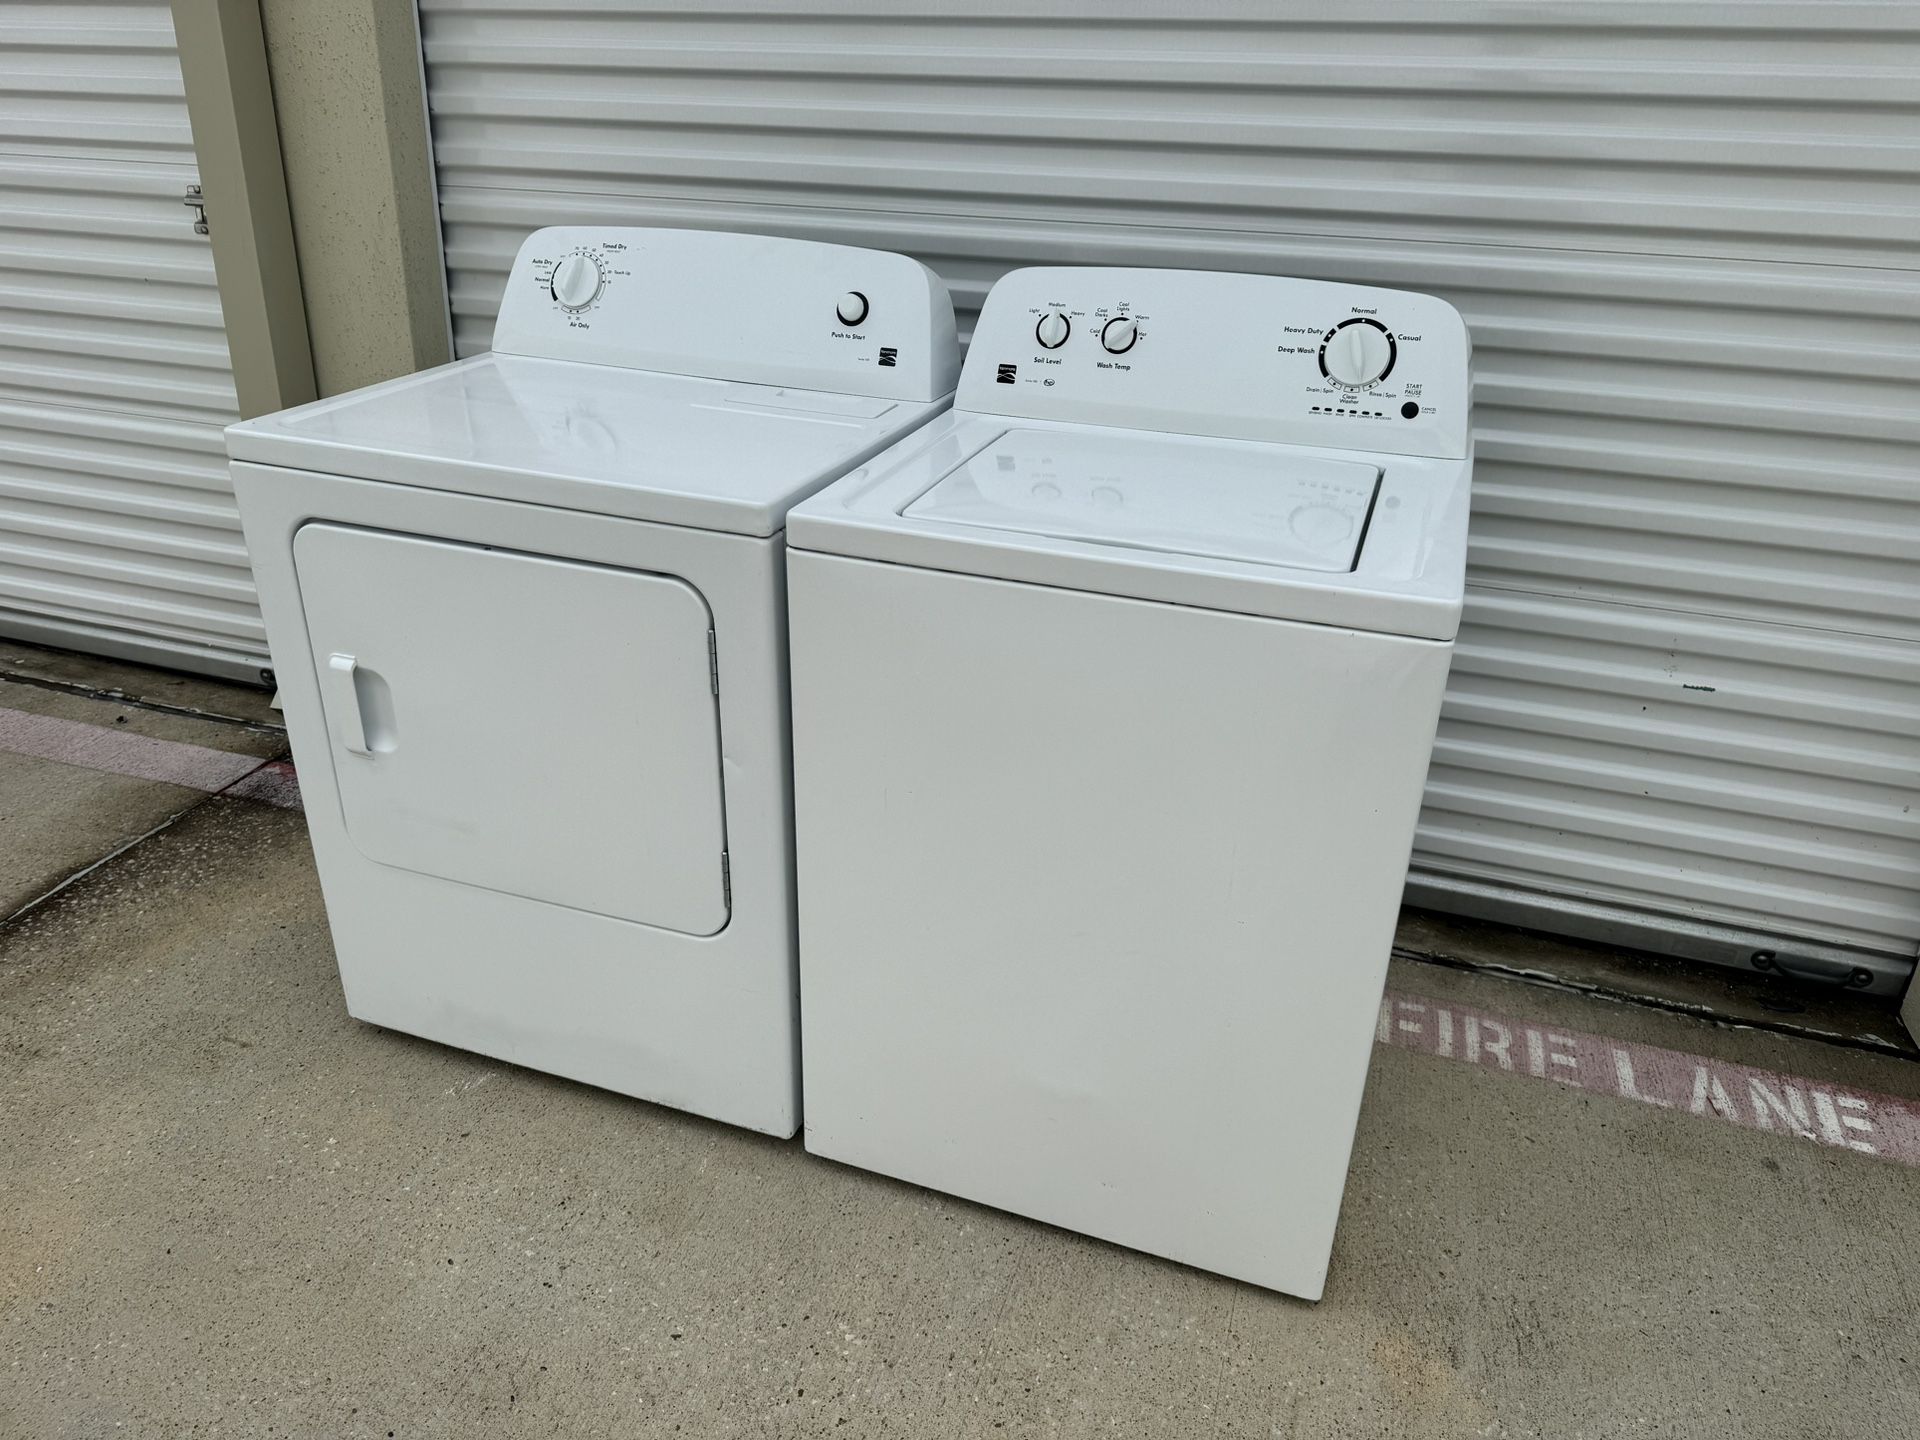 Kenmore Washer And Electric Dryer 